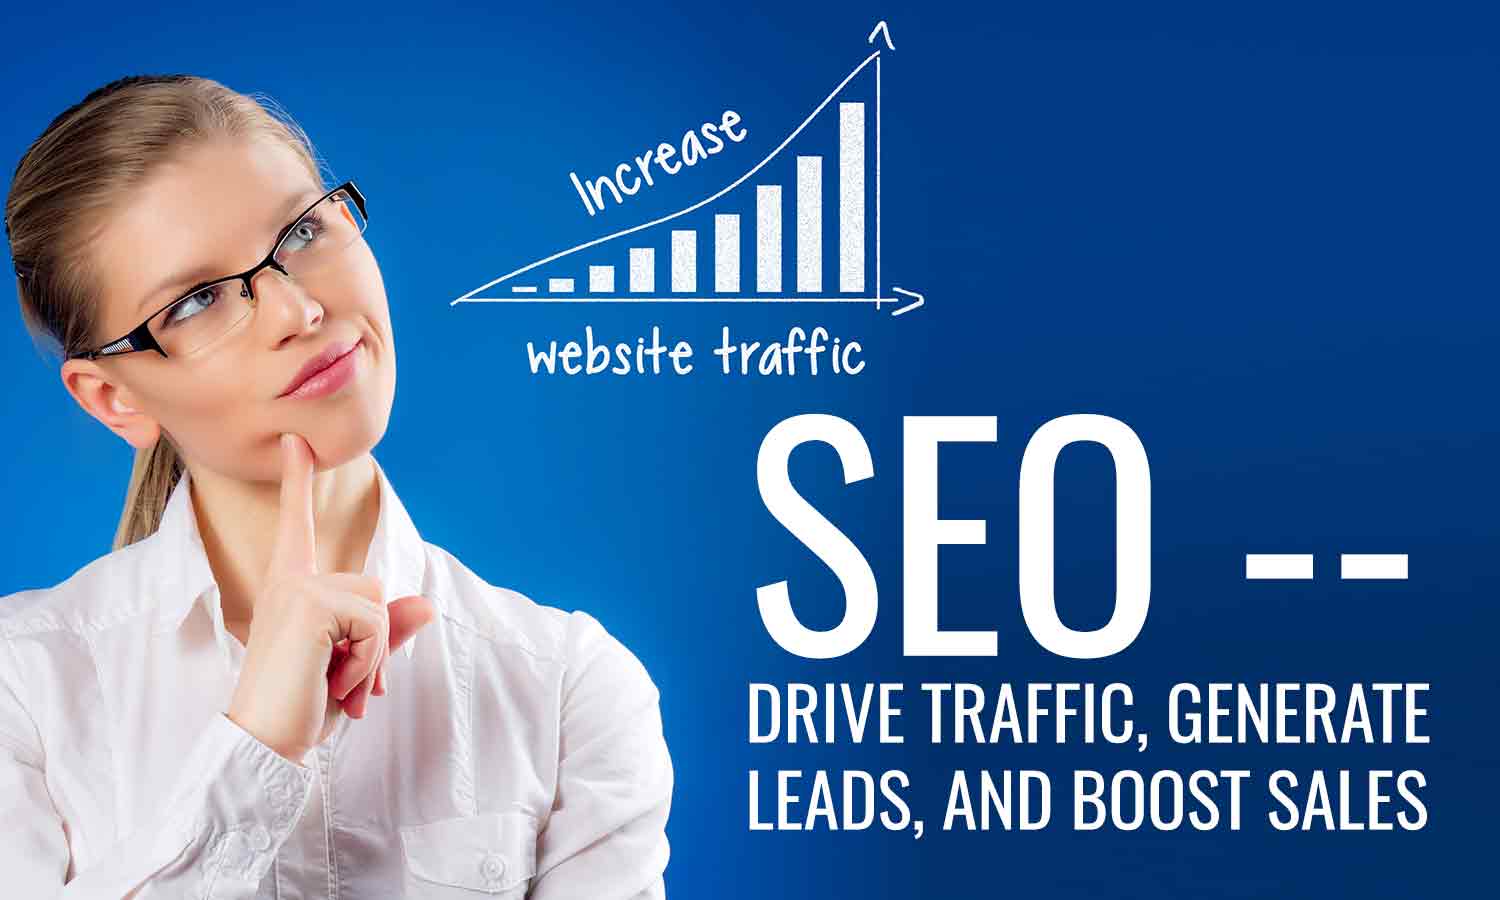 SEO drive traffic, generate leads, and boost sales